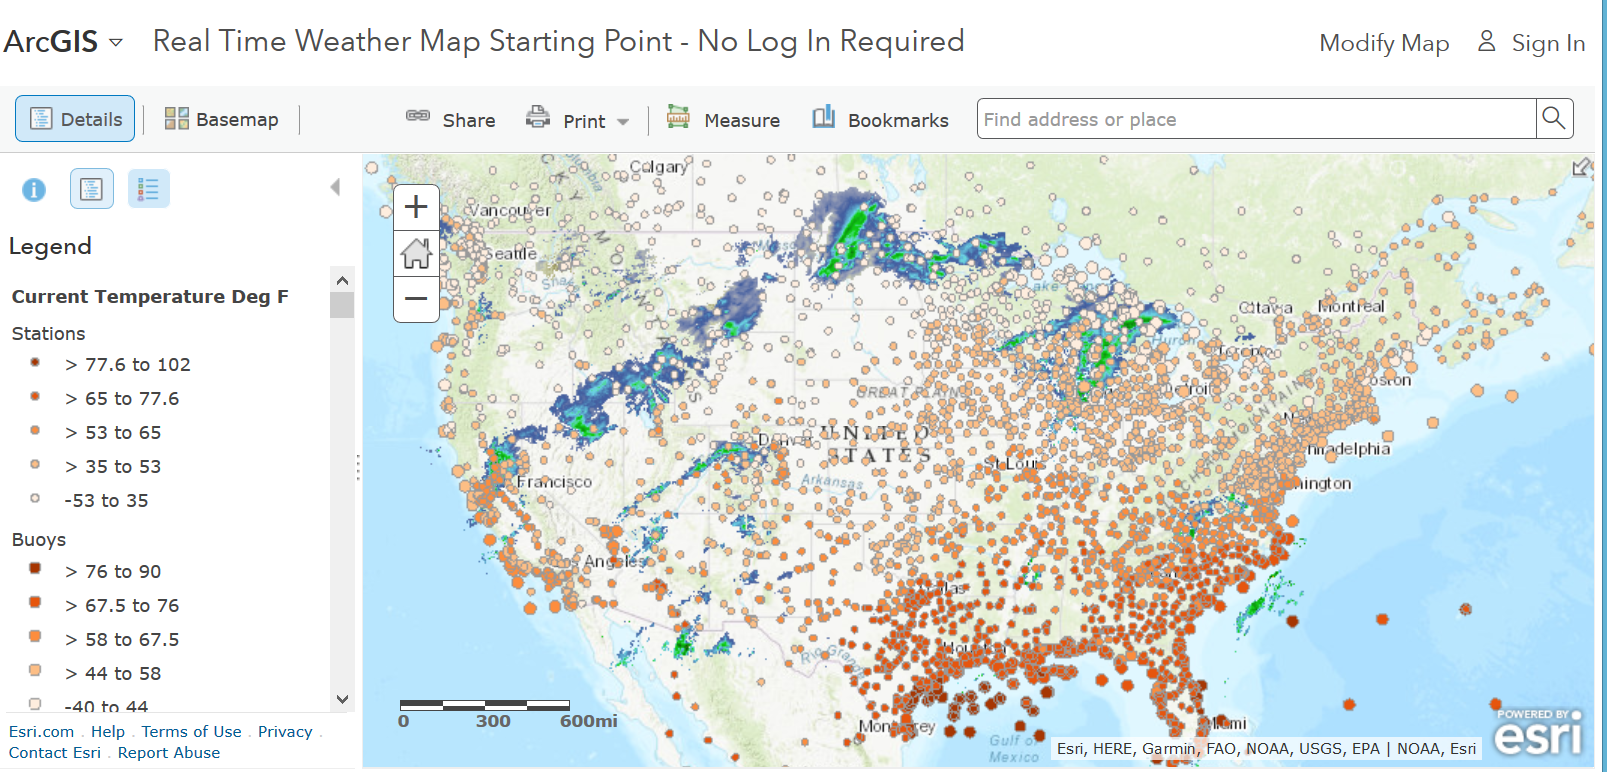 Updating and Curating Maps, Data, and Lessons - Esri Community